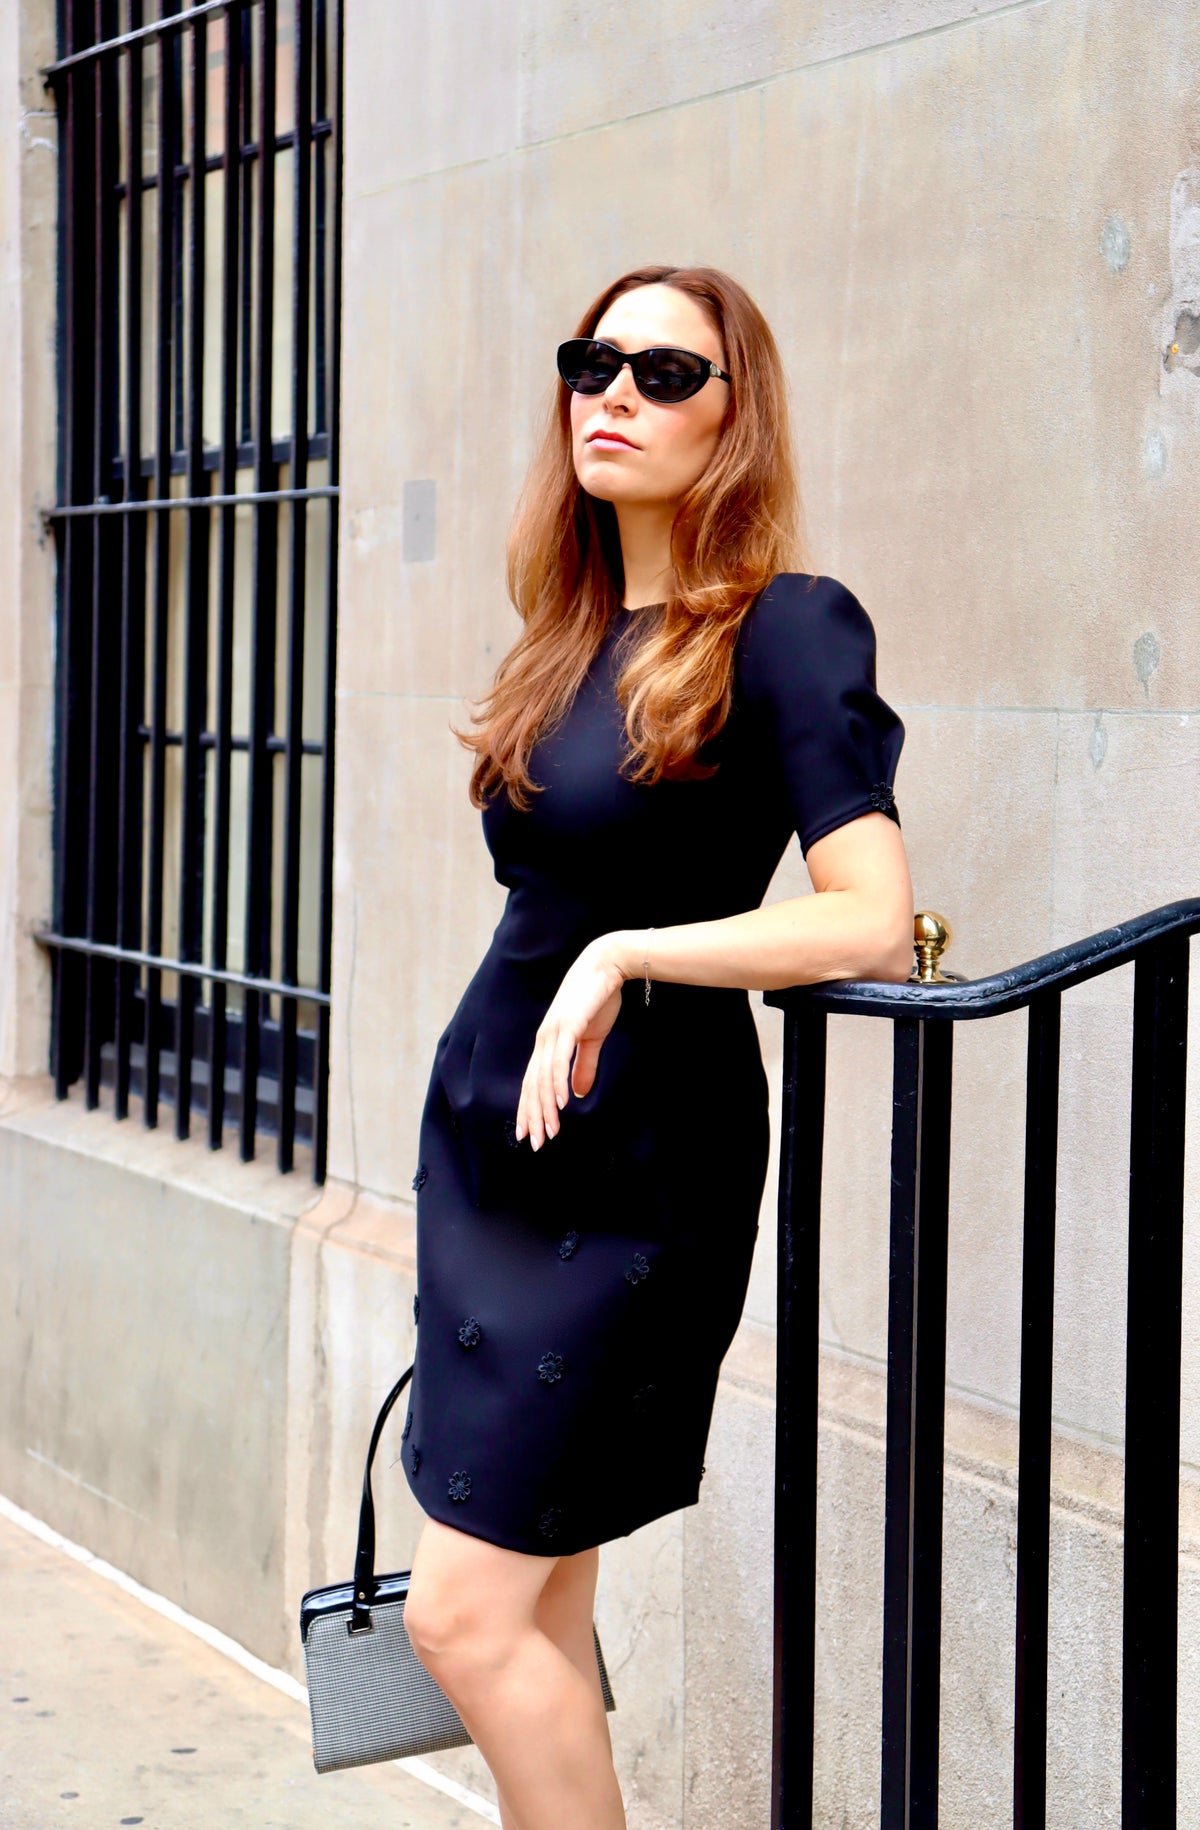 Model leaning on a railing, and stunning in our Fall in Love Floral Appliquéd Black Ponte Dress, sporting sunglasses and a classic bag and heel combo